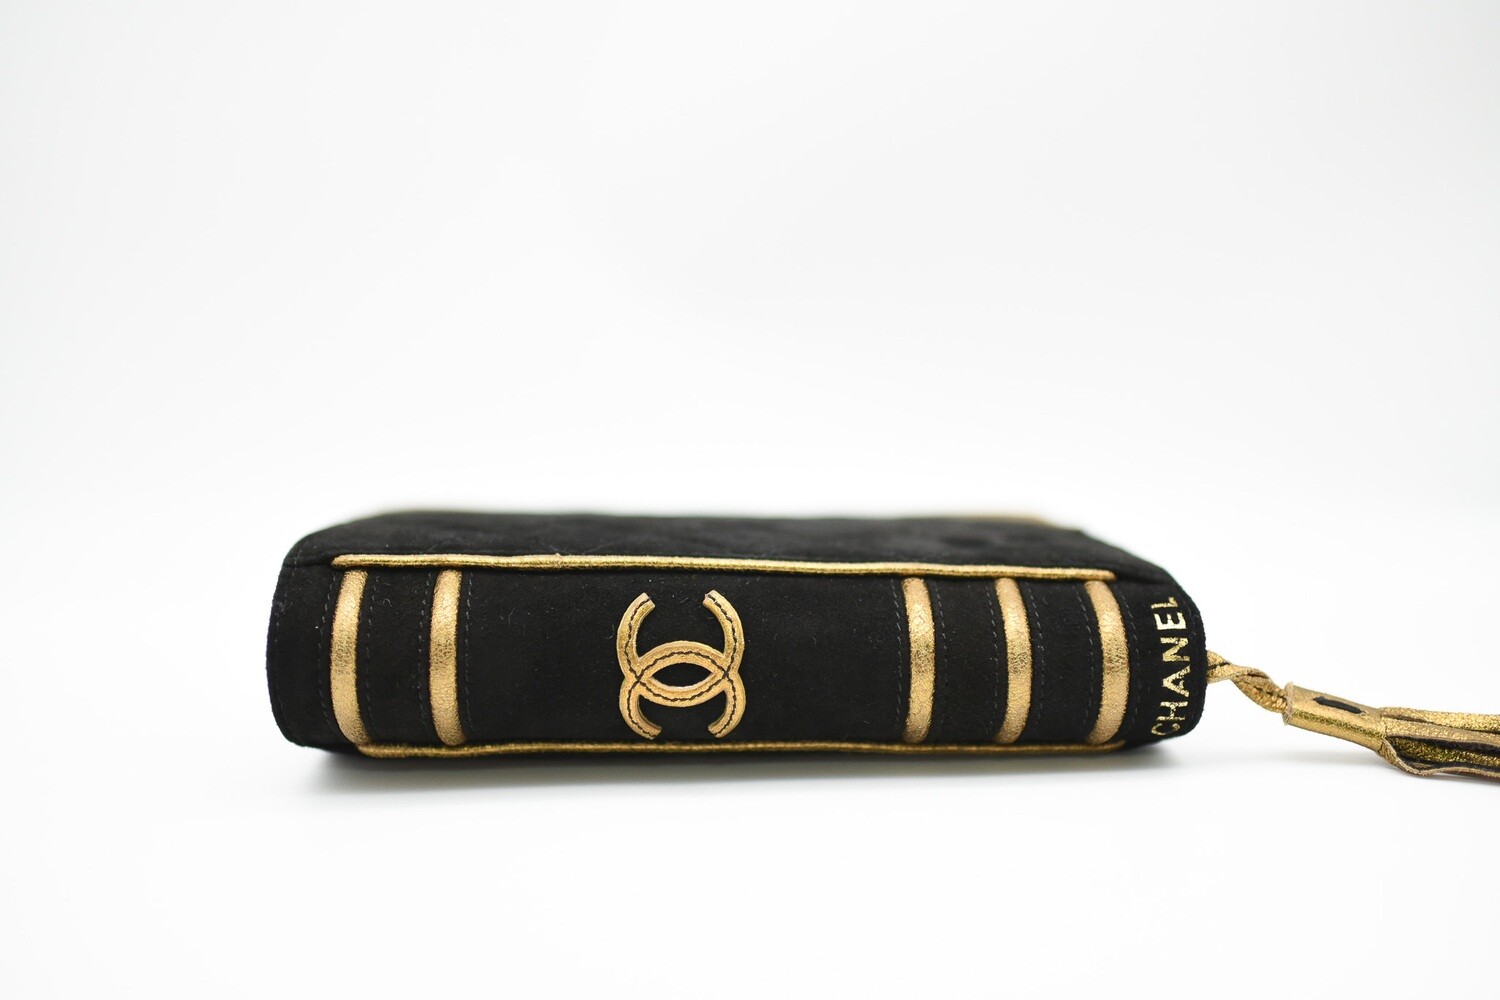 Chanel Vintage Bible Clutch, Black and Gold, Preowned In Dustbag